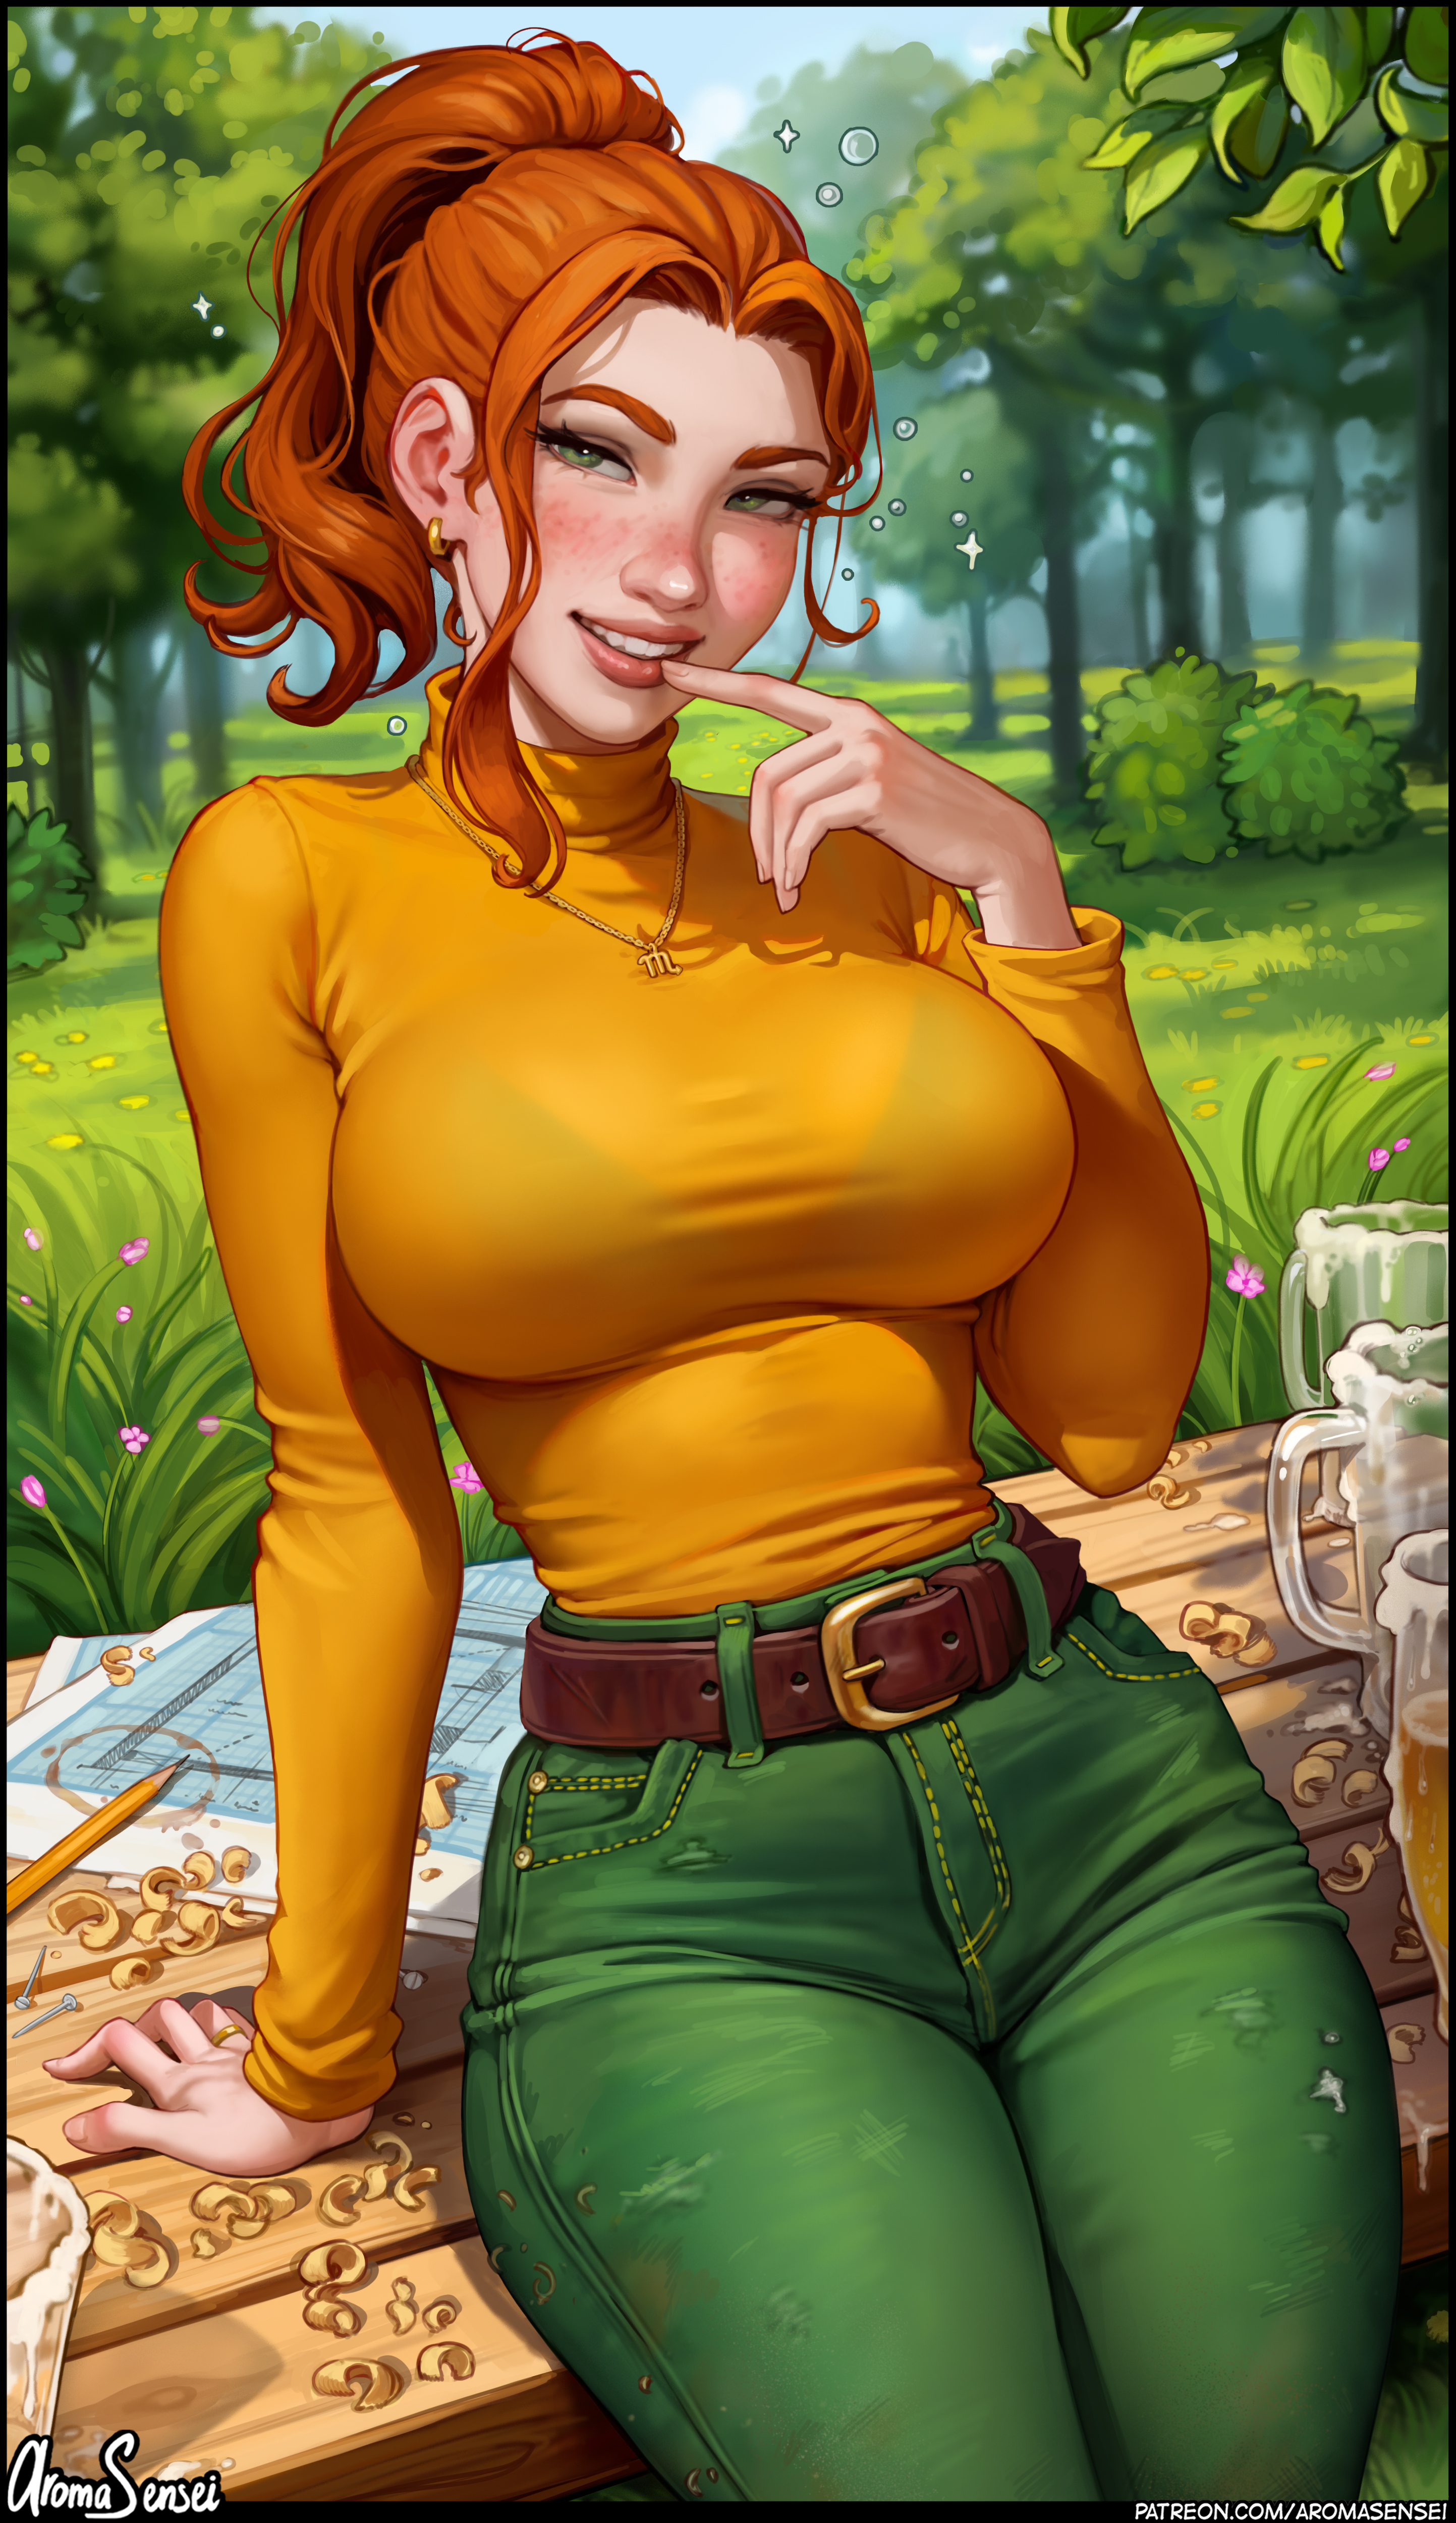 General 2886x5000 video games video game girls video game characters redhead artwork drawing fan art Aroma Sensei ponytail smiling portrait display necklace bra grass leaves Robin (Stardew Valley) Stardew Valley